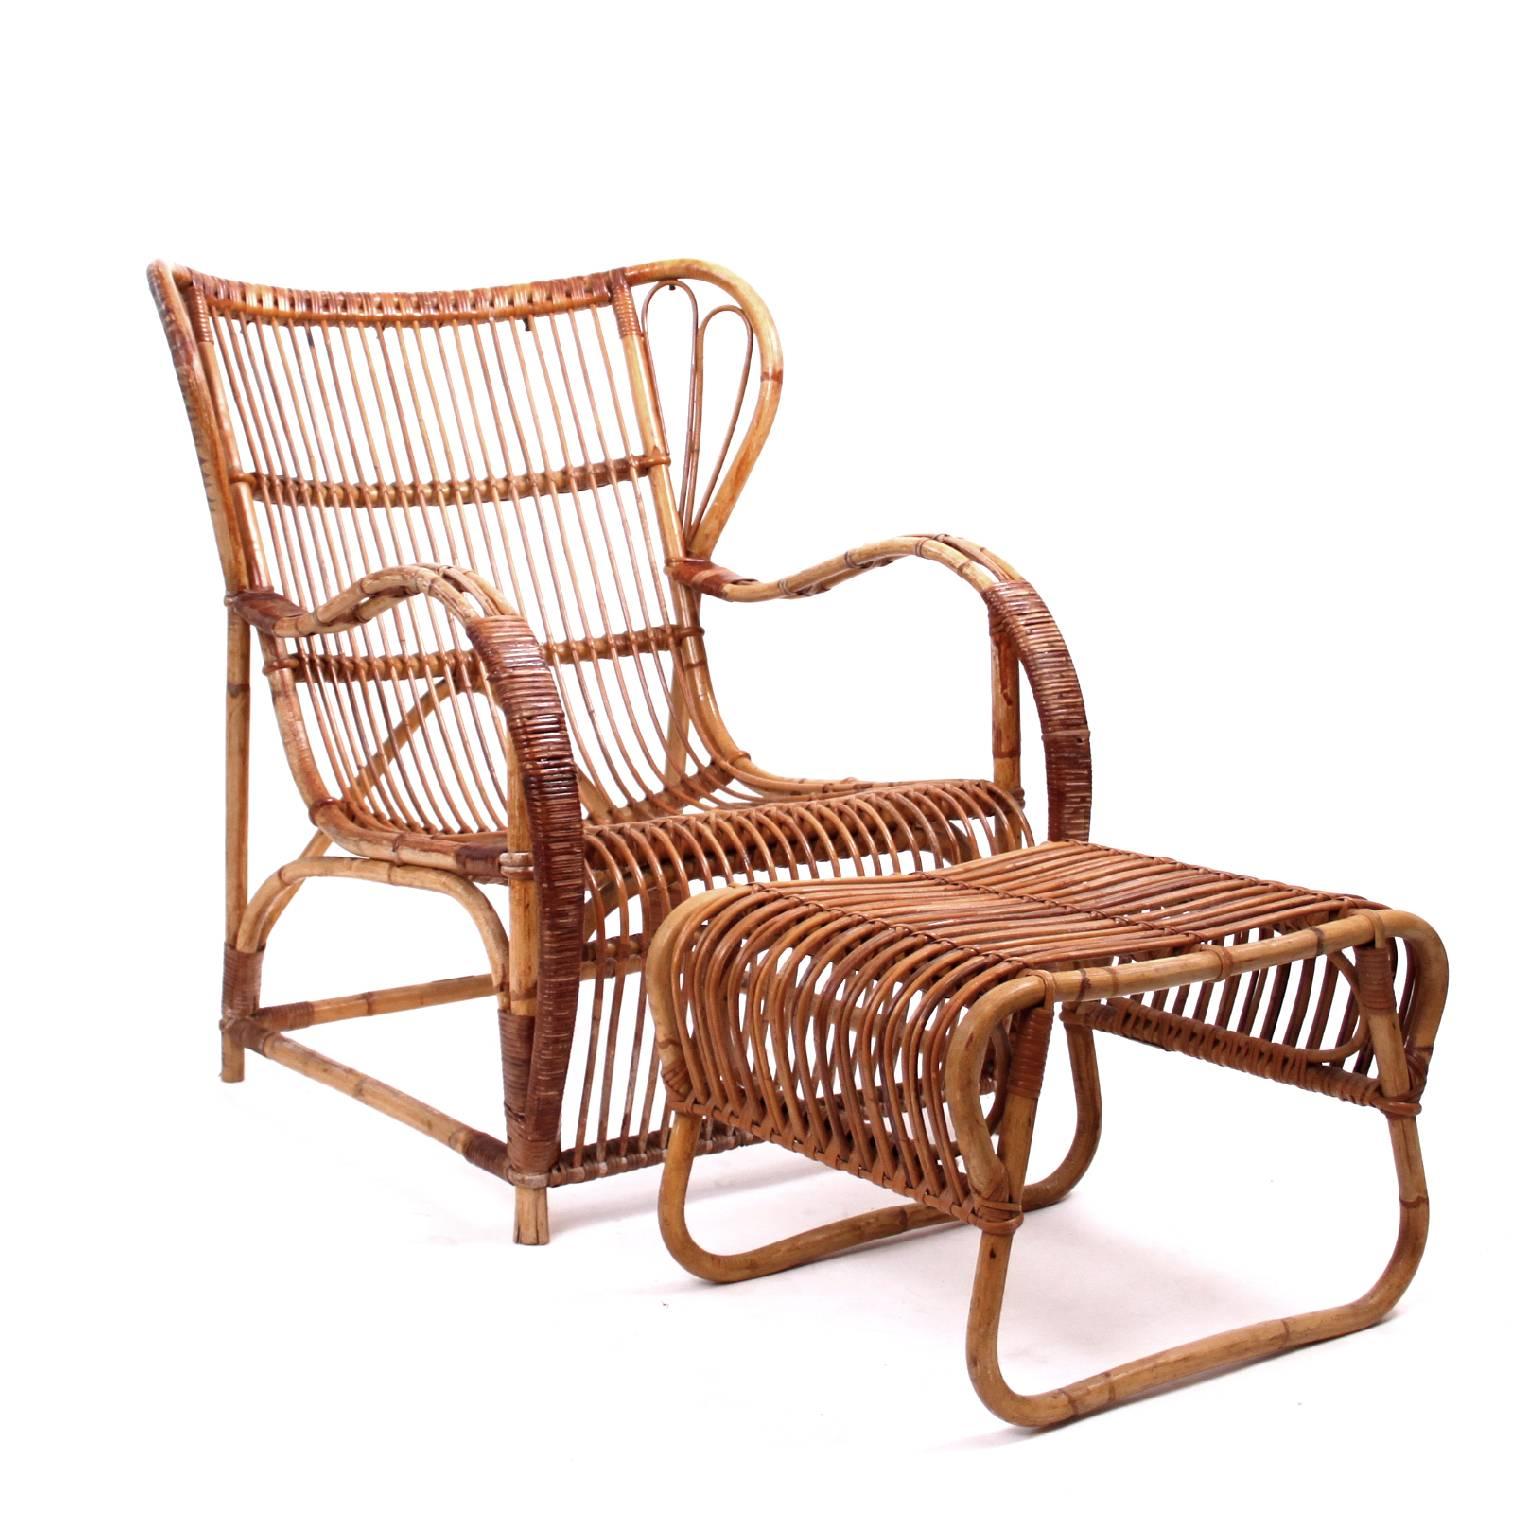 A pair of elegant bamboo lounge chairs with foot stools by Viggo Boesen for R. Wengler, Denmark. 

Designed and manufactured in Denmark, 1930s.

The bamboo has a beautiful dark color from aging and is in an excellent condition.

 